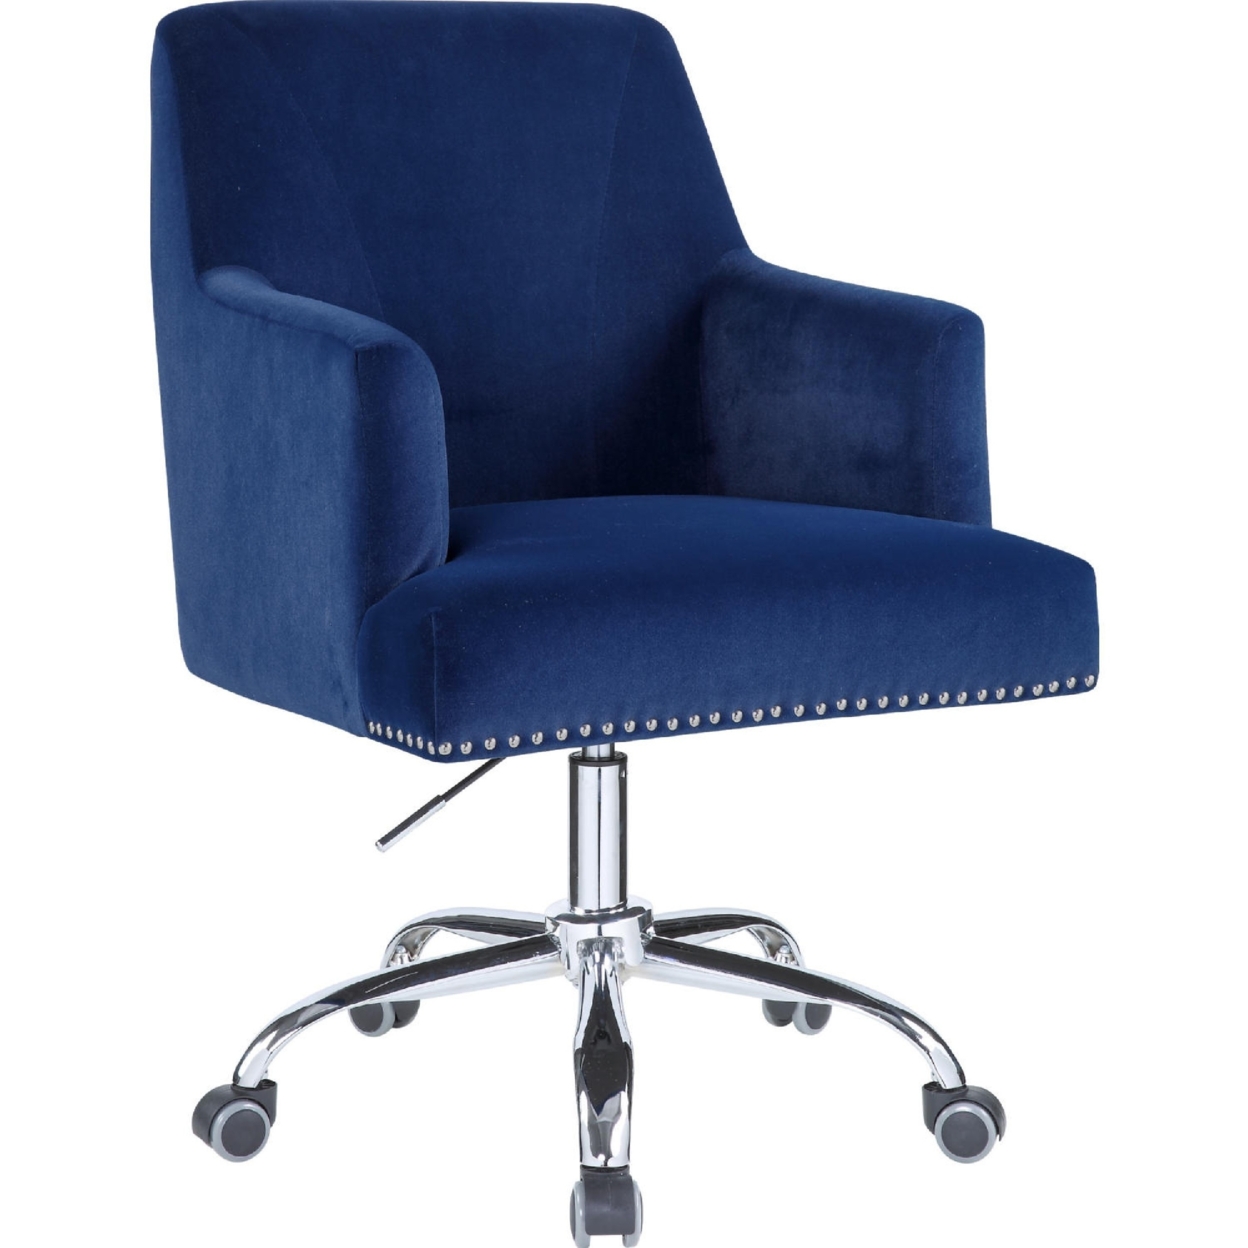 Swivel Office Chair With Sleek Track Arms And Nailhead Trim,Blue And Chrome- Saltoro Sherpi